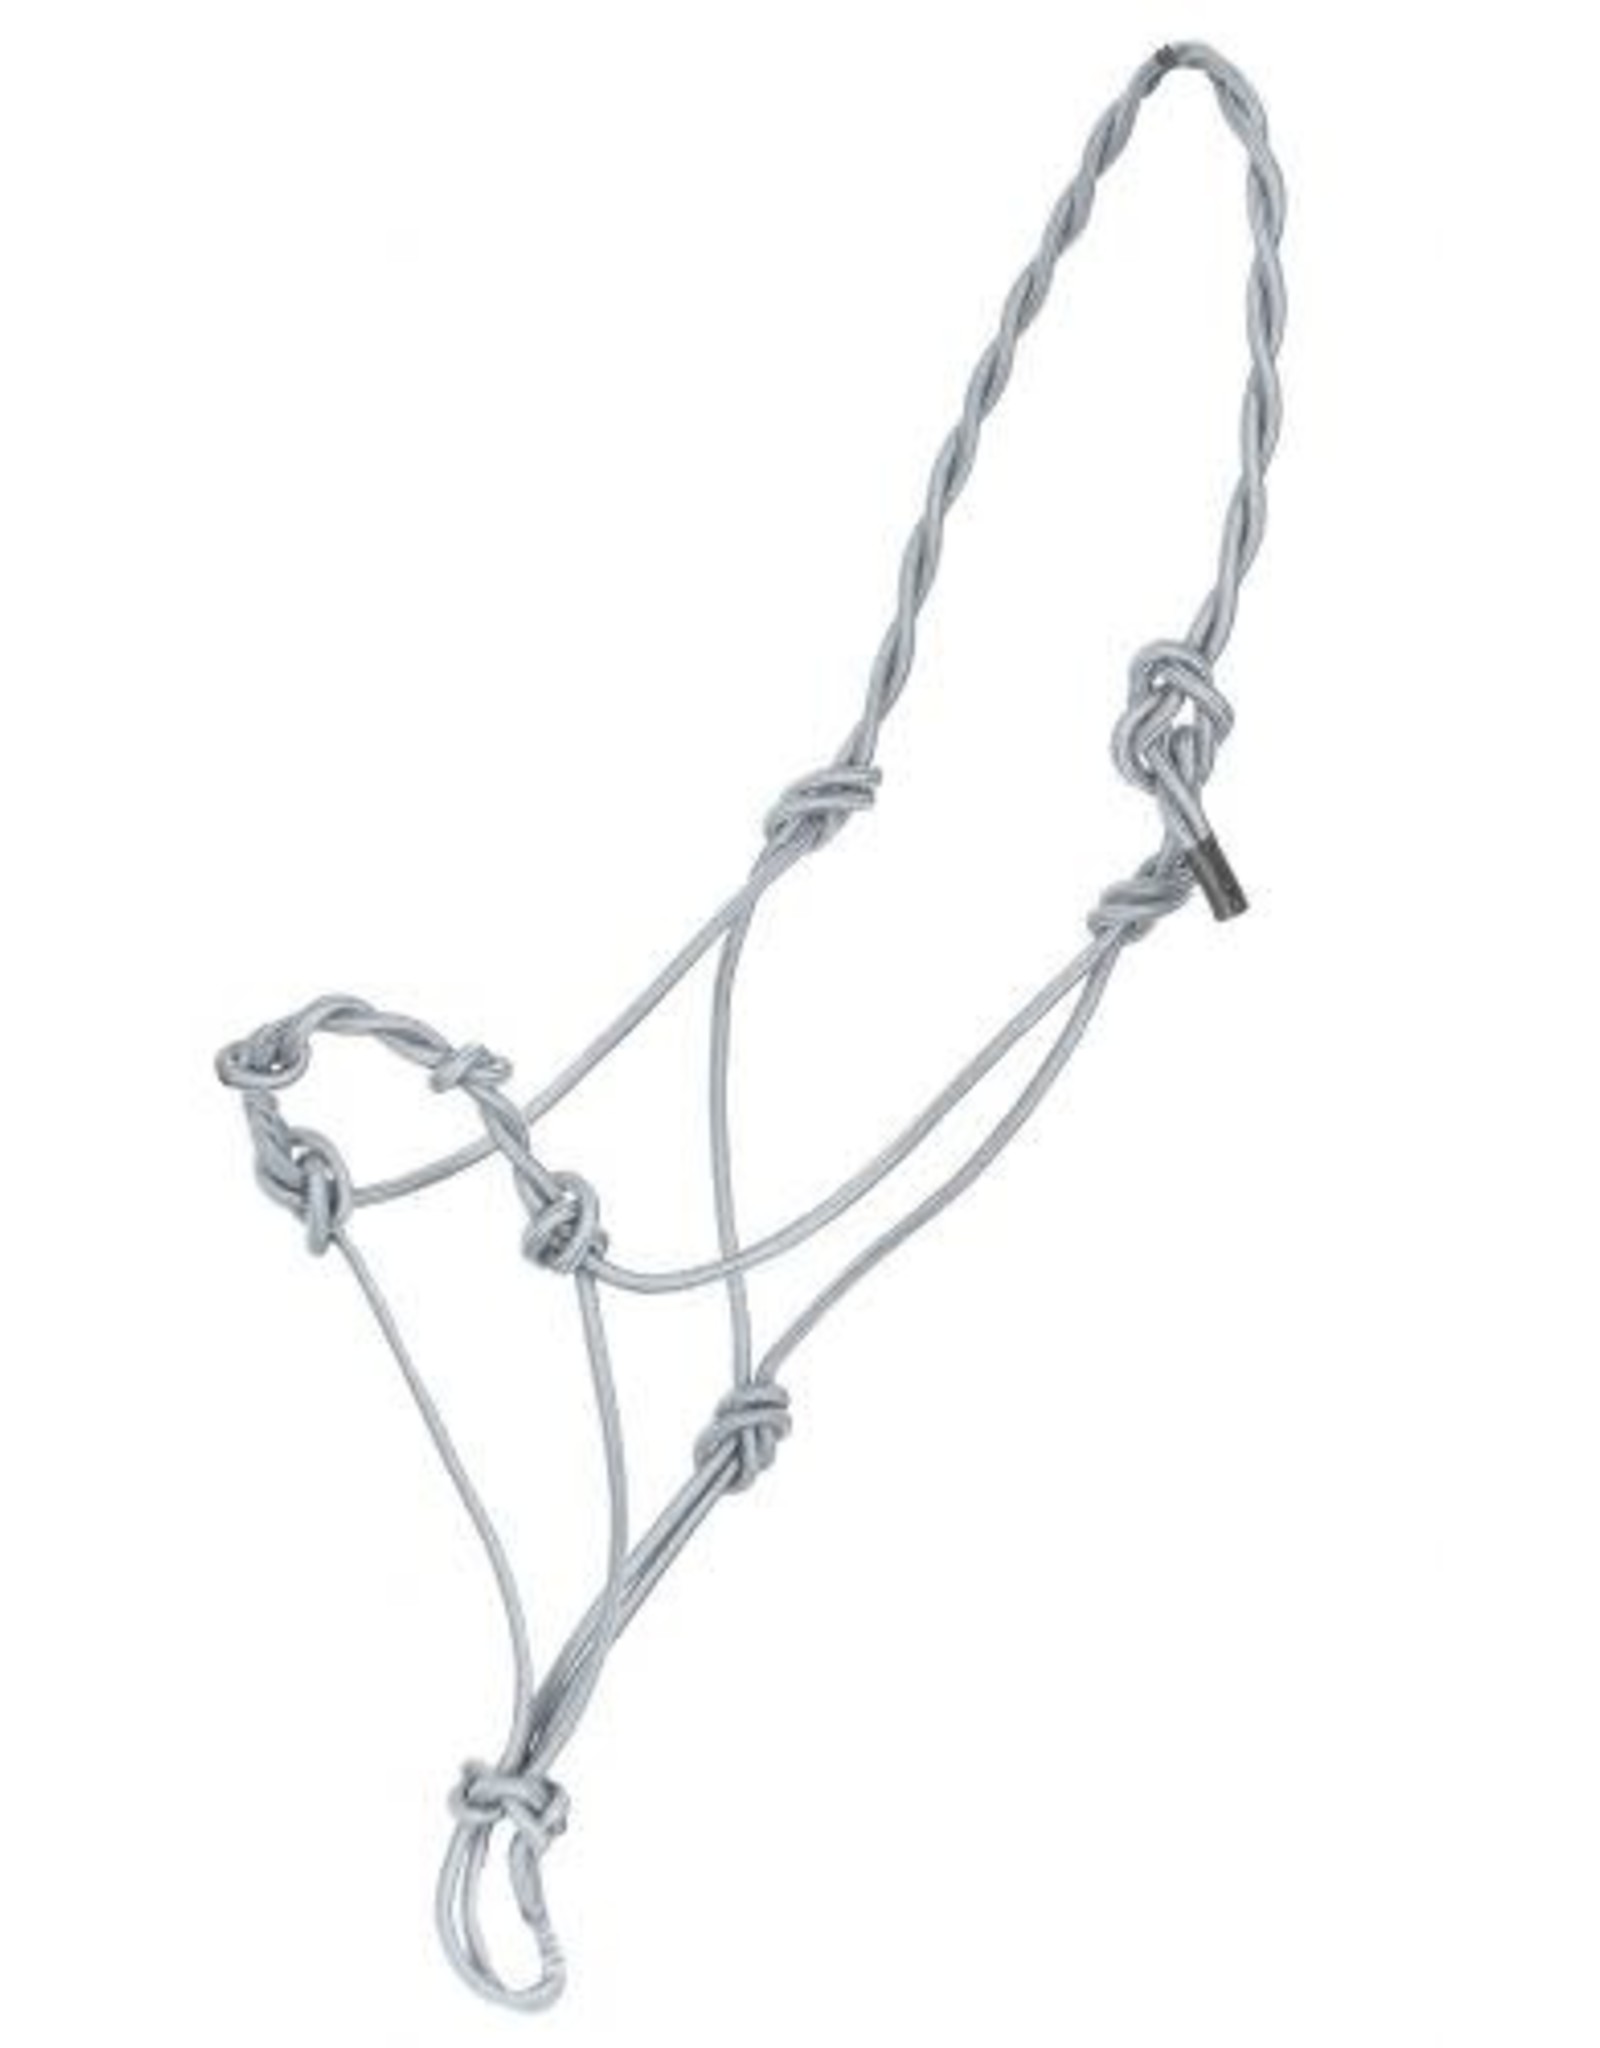 Showman Showman Silver Cowboy Knotted Rope Halter 4341